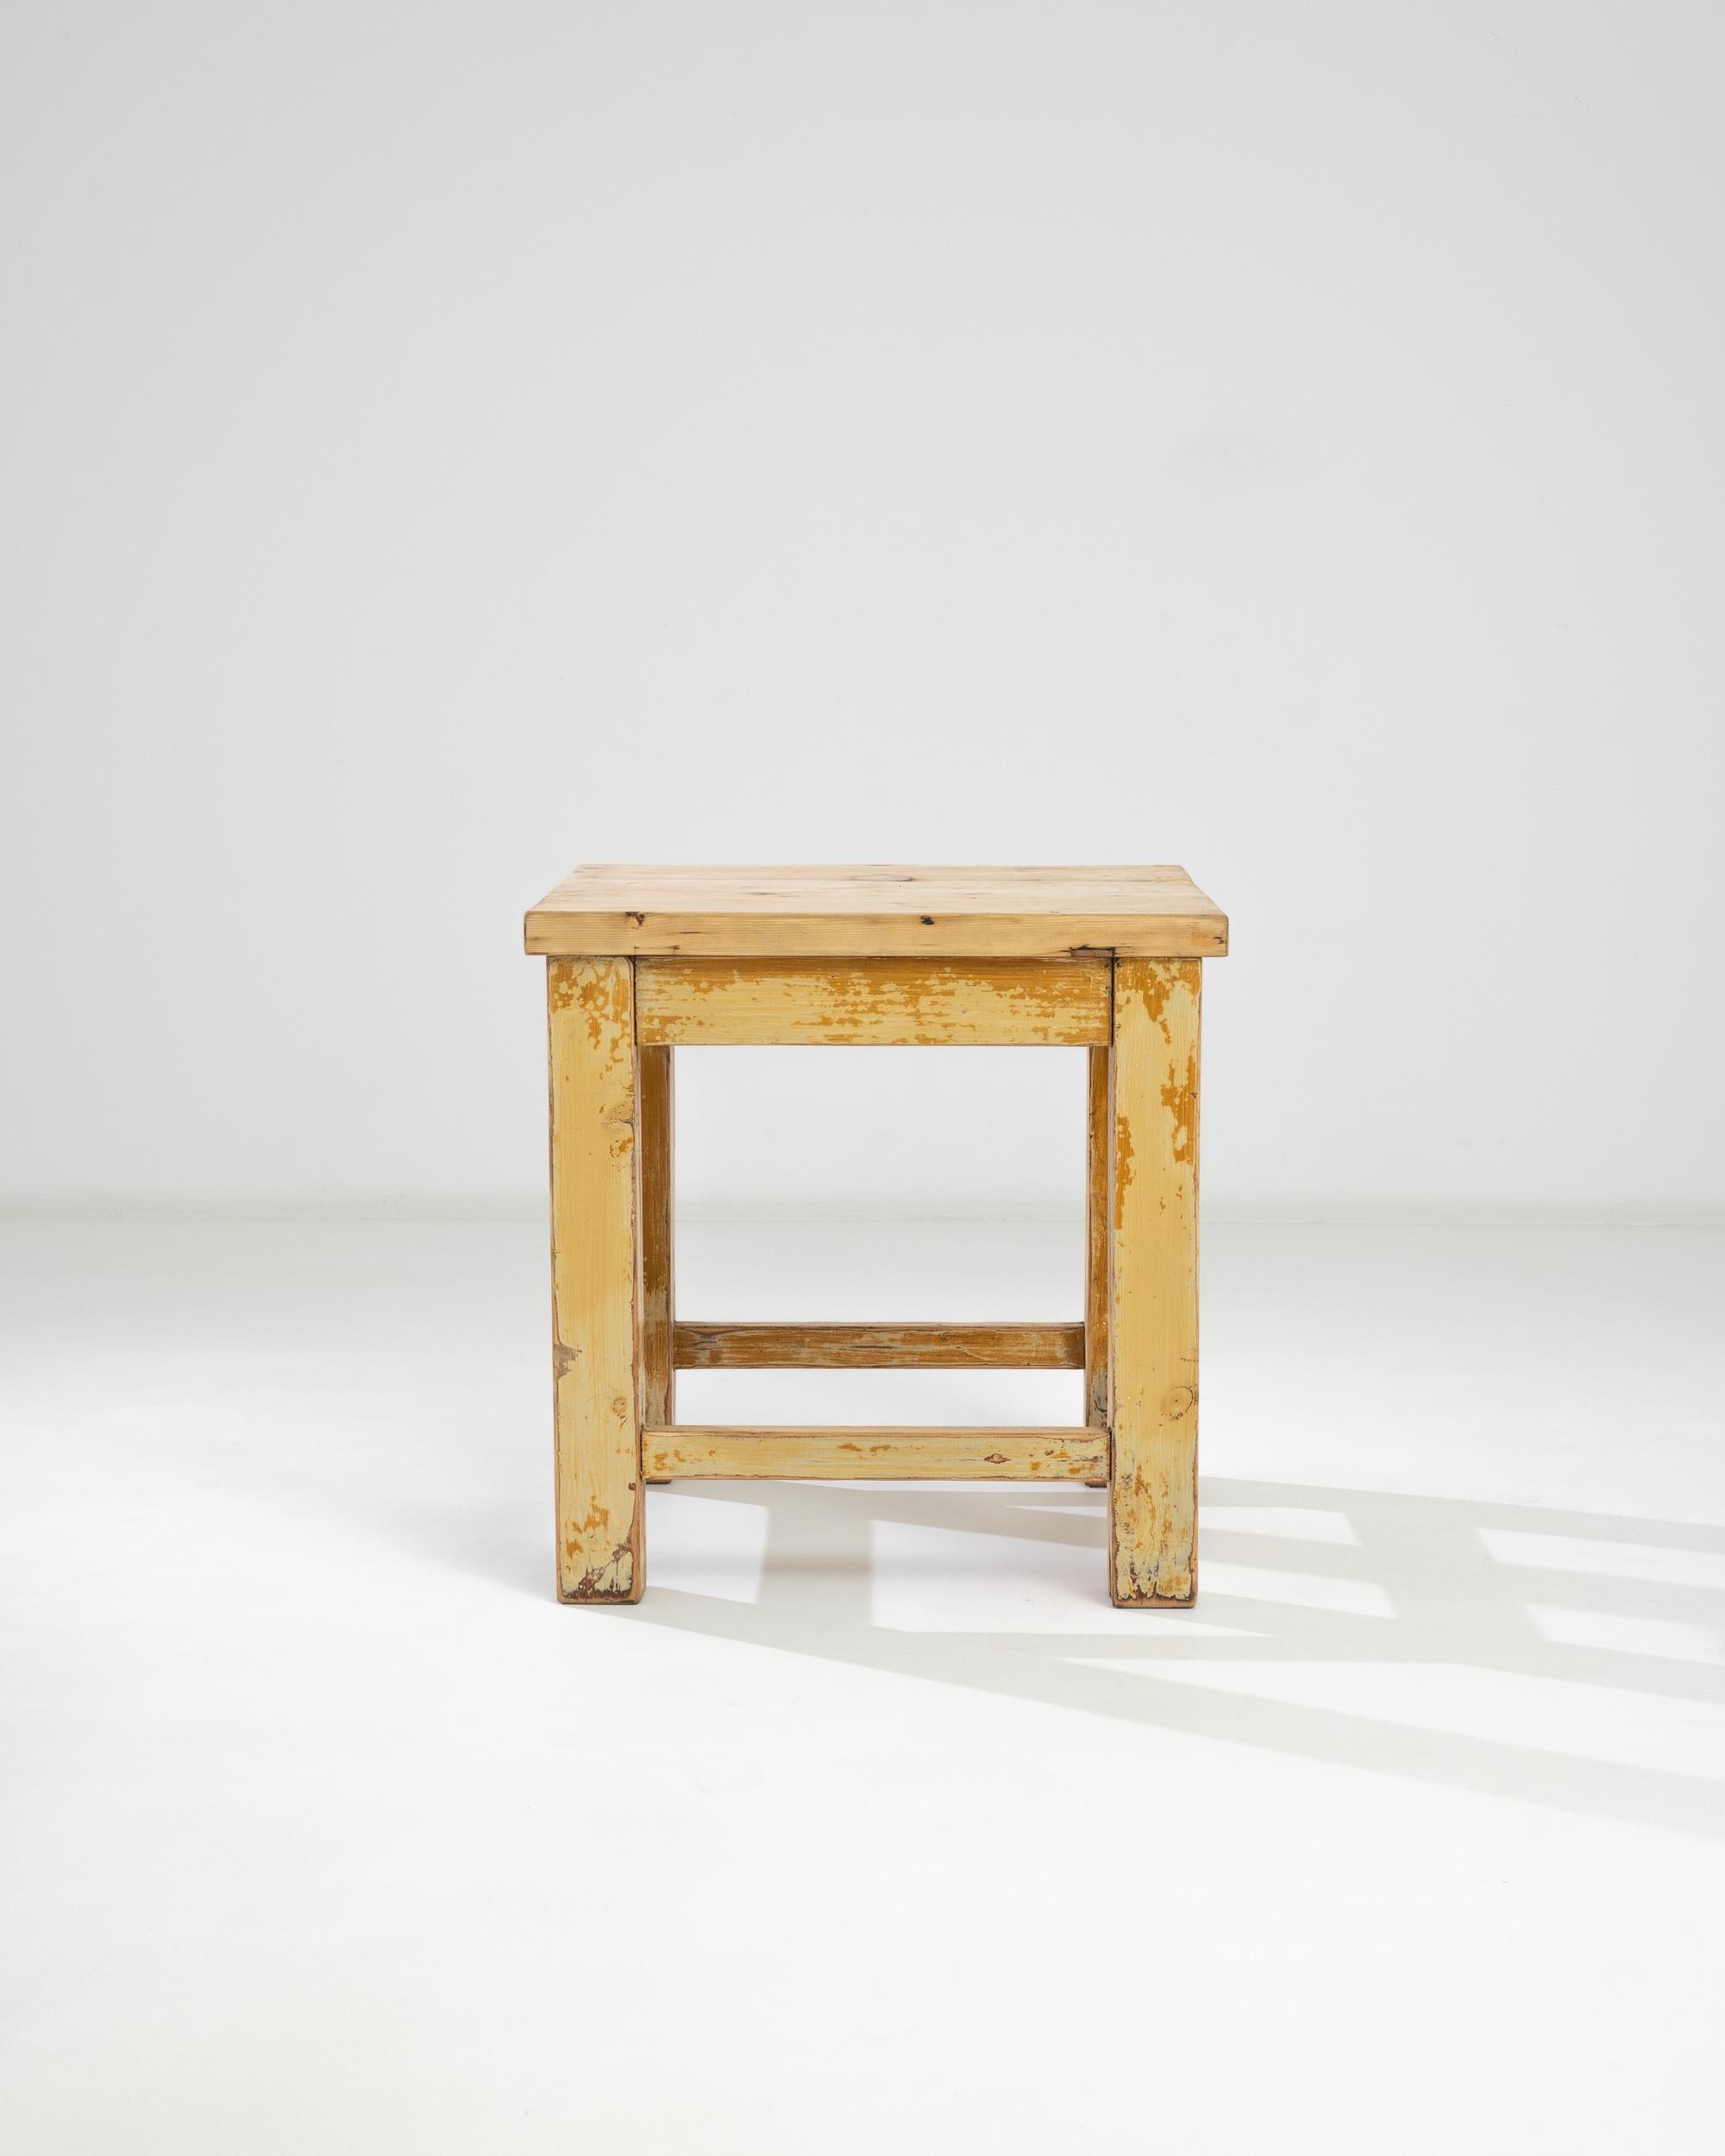 A wooden side table from 1930s central Europe. Constructed nearly in the dimensions of a cube, this solidly constructed table catches the eye as a charming and bright furnishing addition. Mortise and tenon aprons and stretchers fit together smartly,